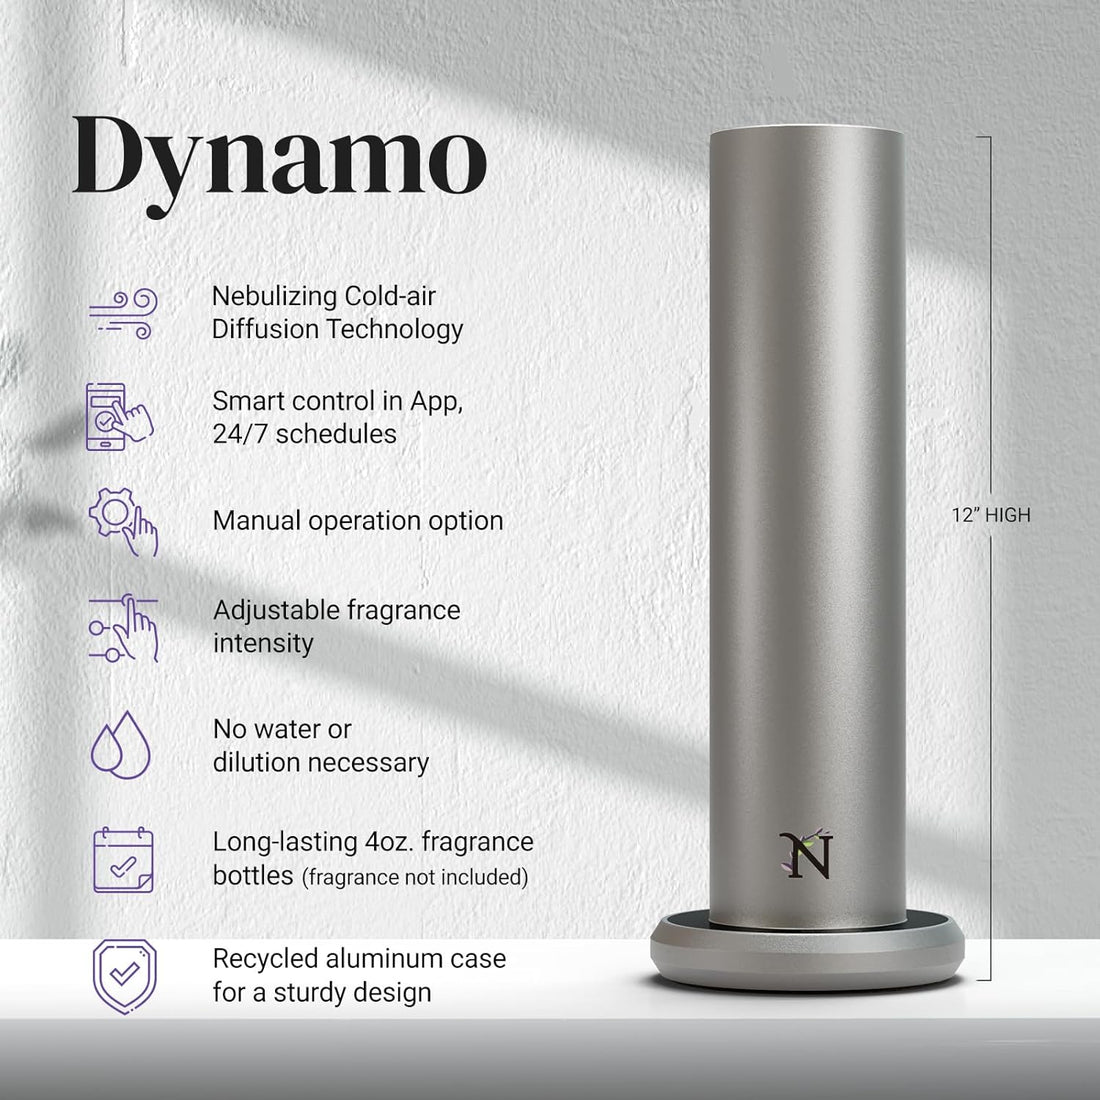 Natscent Updated Dynamo Essential Oil Diffusers, App or Manual Control, Plug & Play, Smart Diffusers for Essential Oils Large Room, Cold Air Diffusers for Home, Office ~1000 sq.ft – Titanium